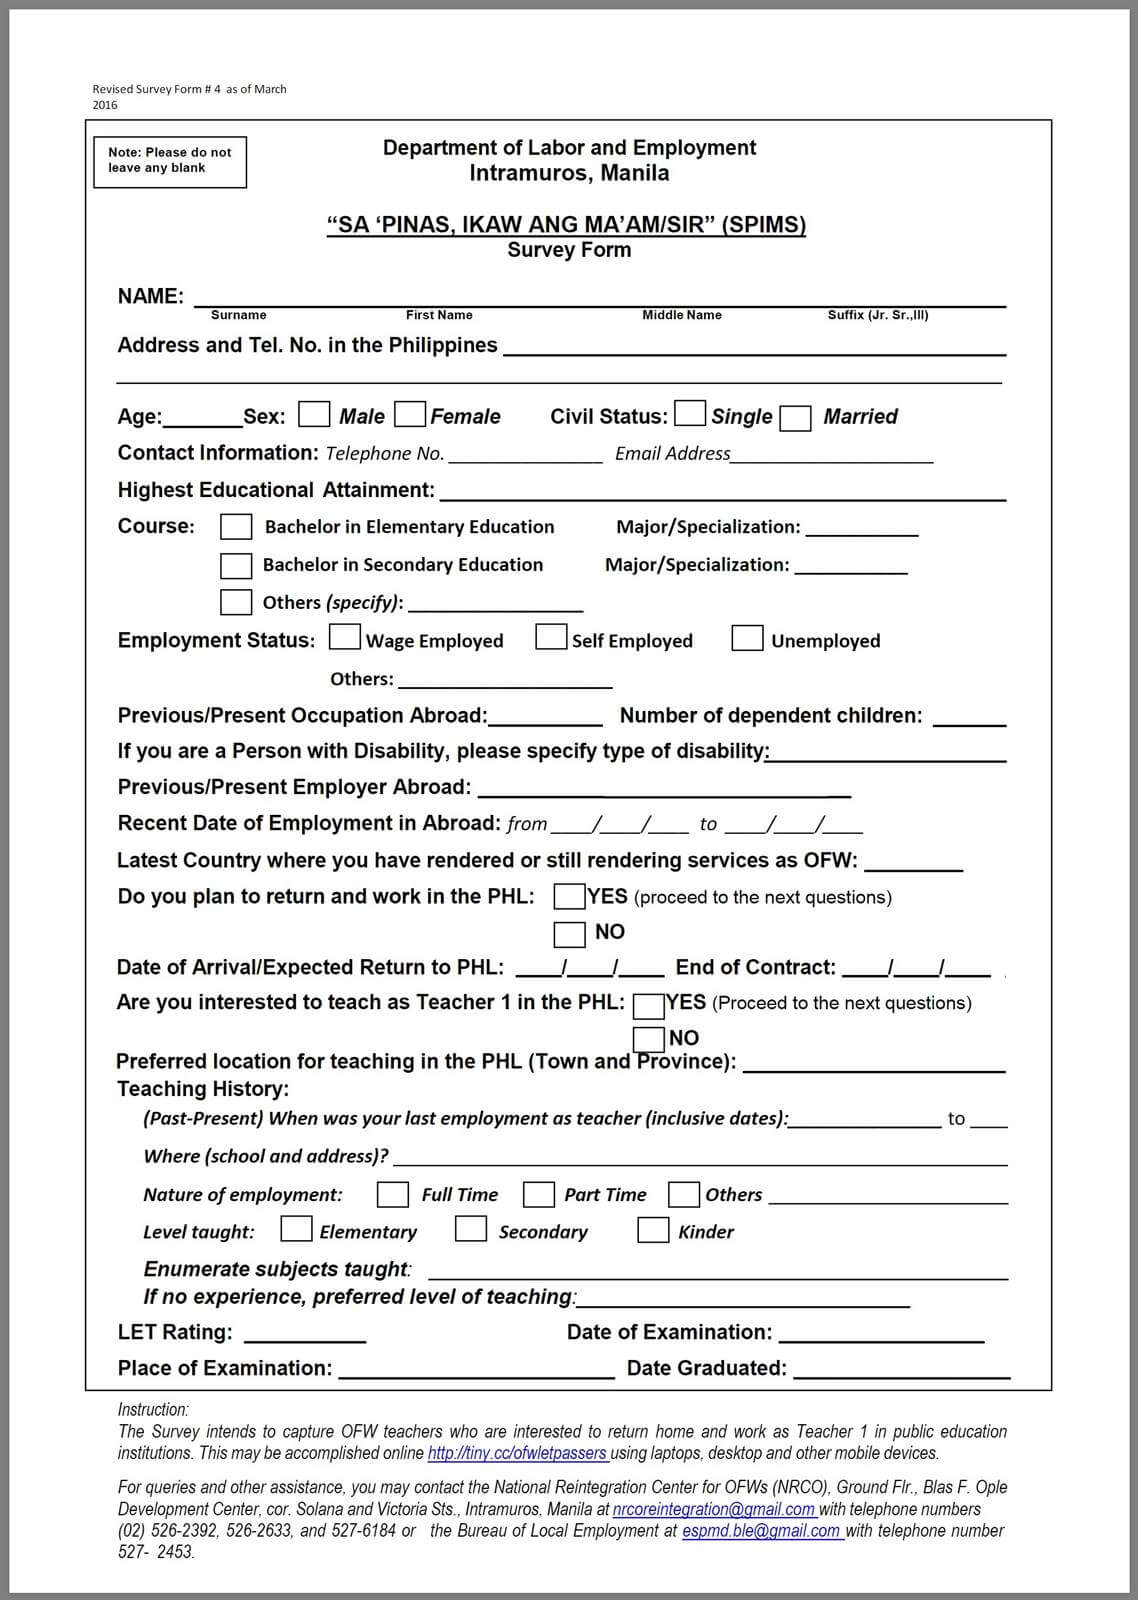 SPIMS application form by DOLE